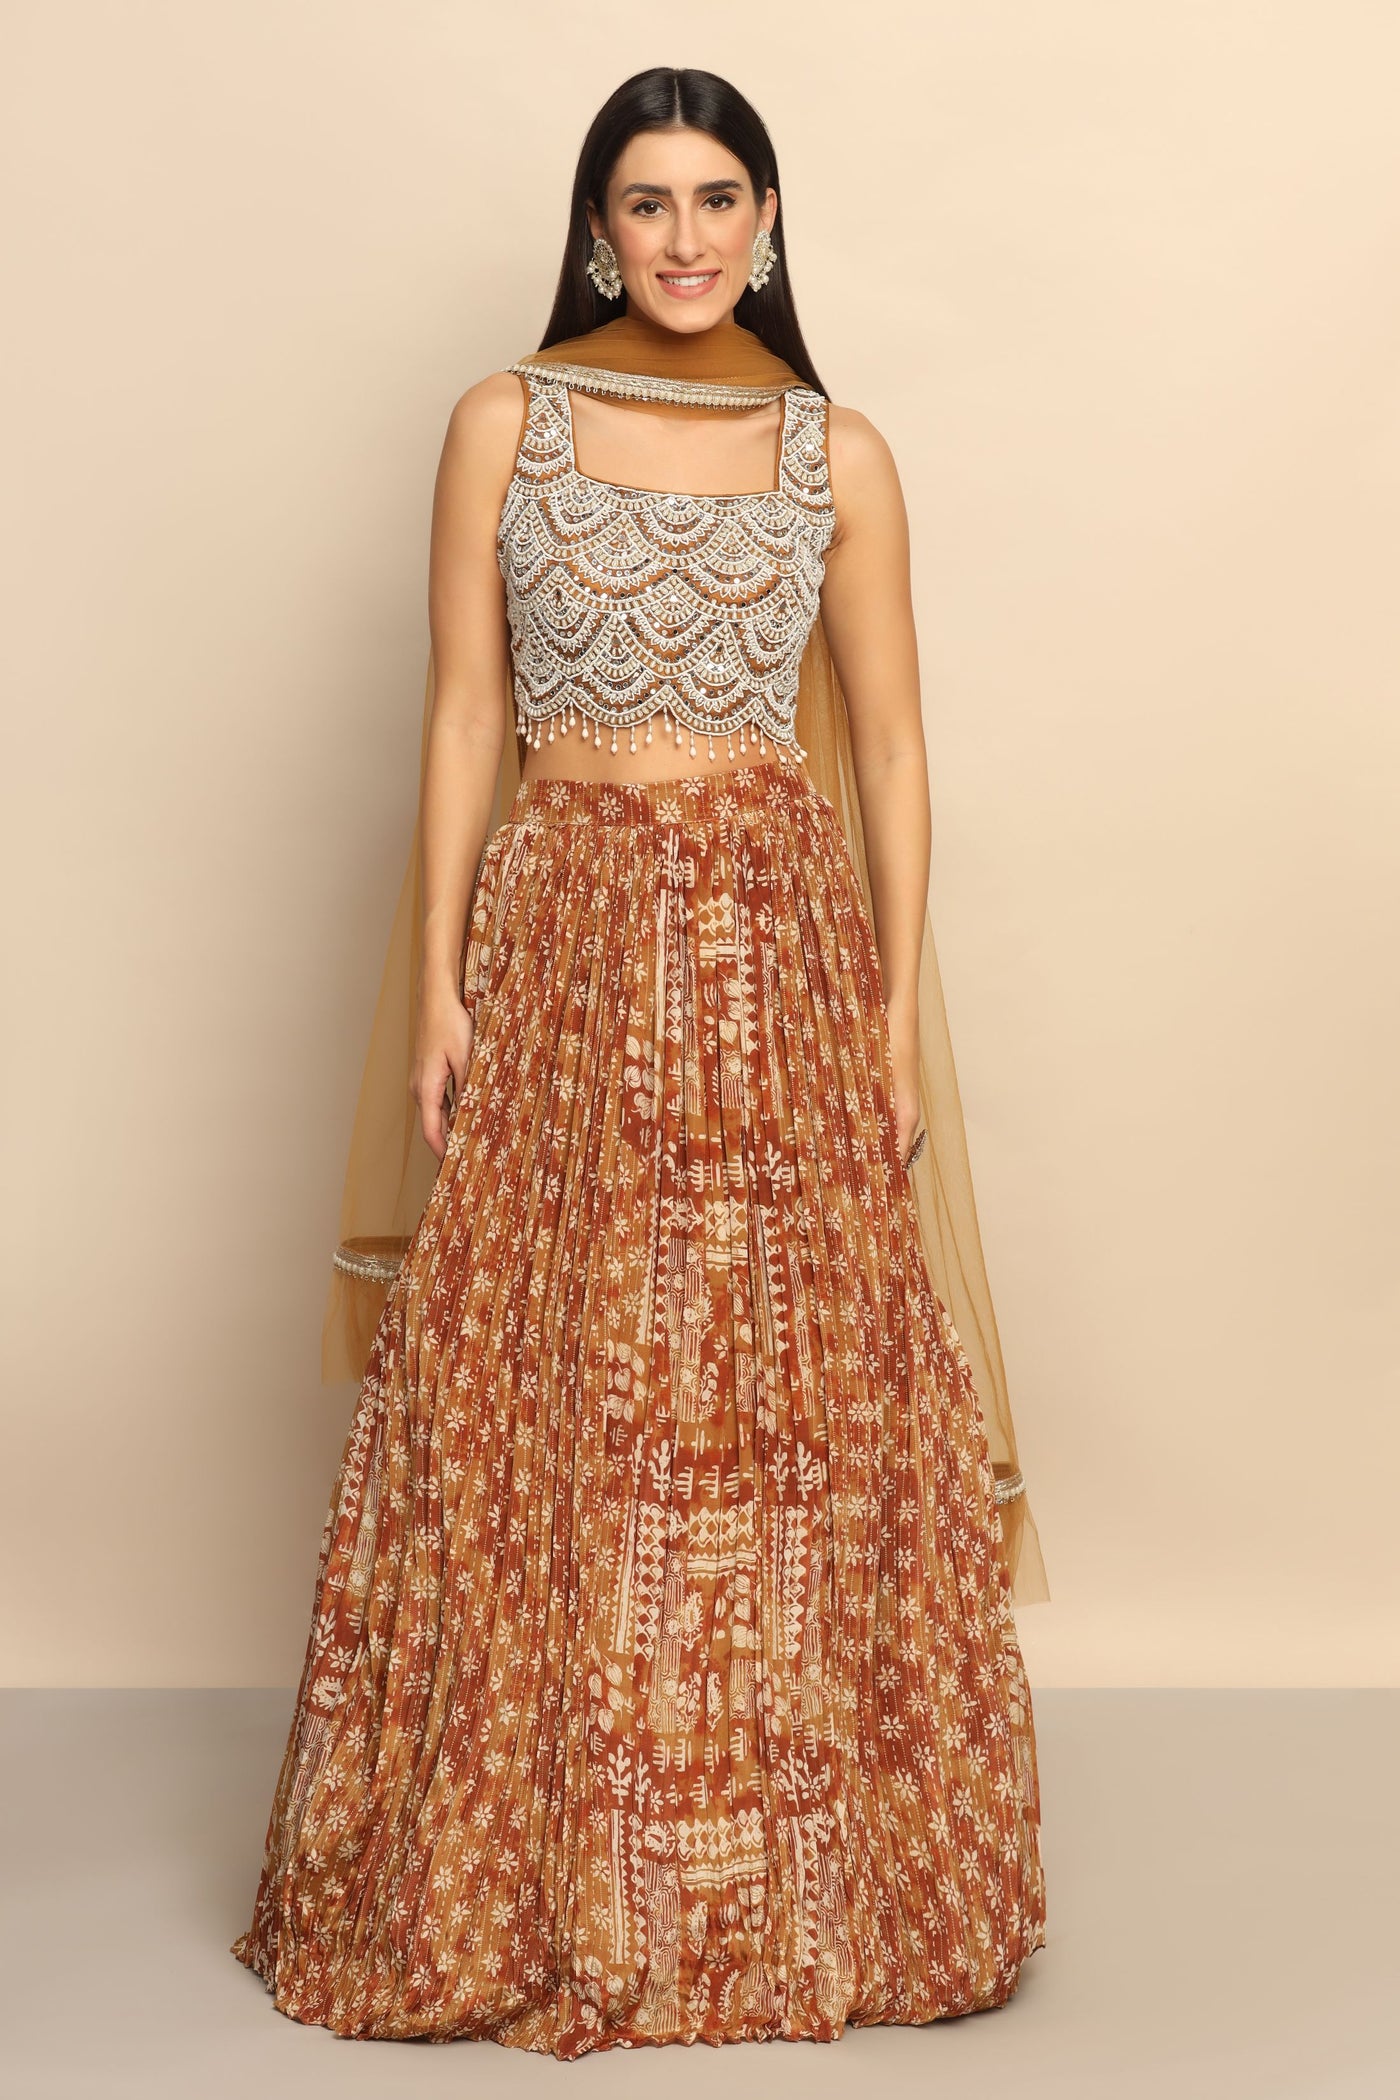 Exquisite Brown Poth Beads and Mirror Lehenga - Embrace Timeless Elegance